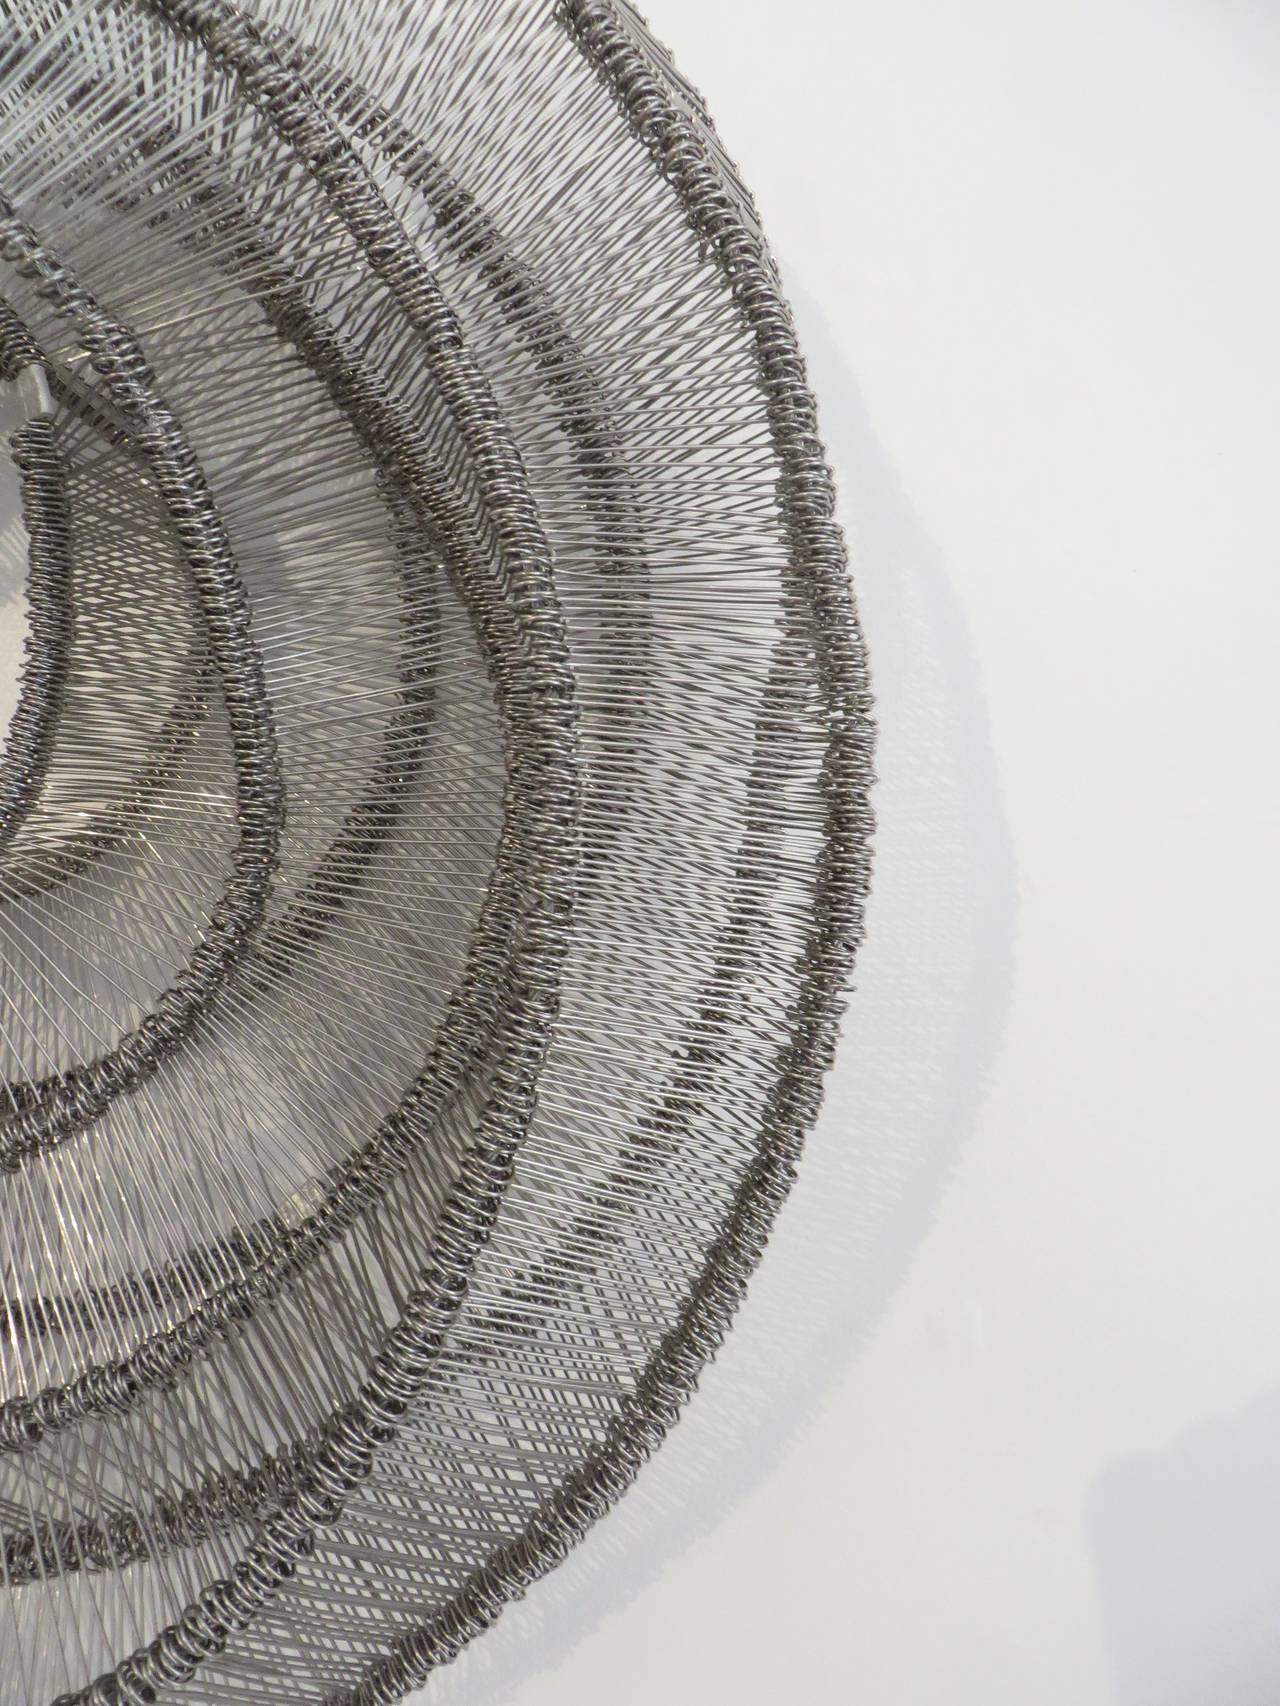 Eric Gushee Emergence Series No. 1 Stainless Steel Woven Metal Sculpture, 2015 4